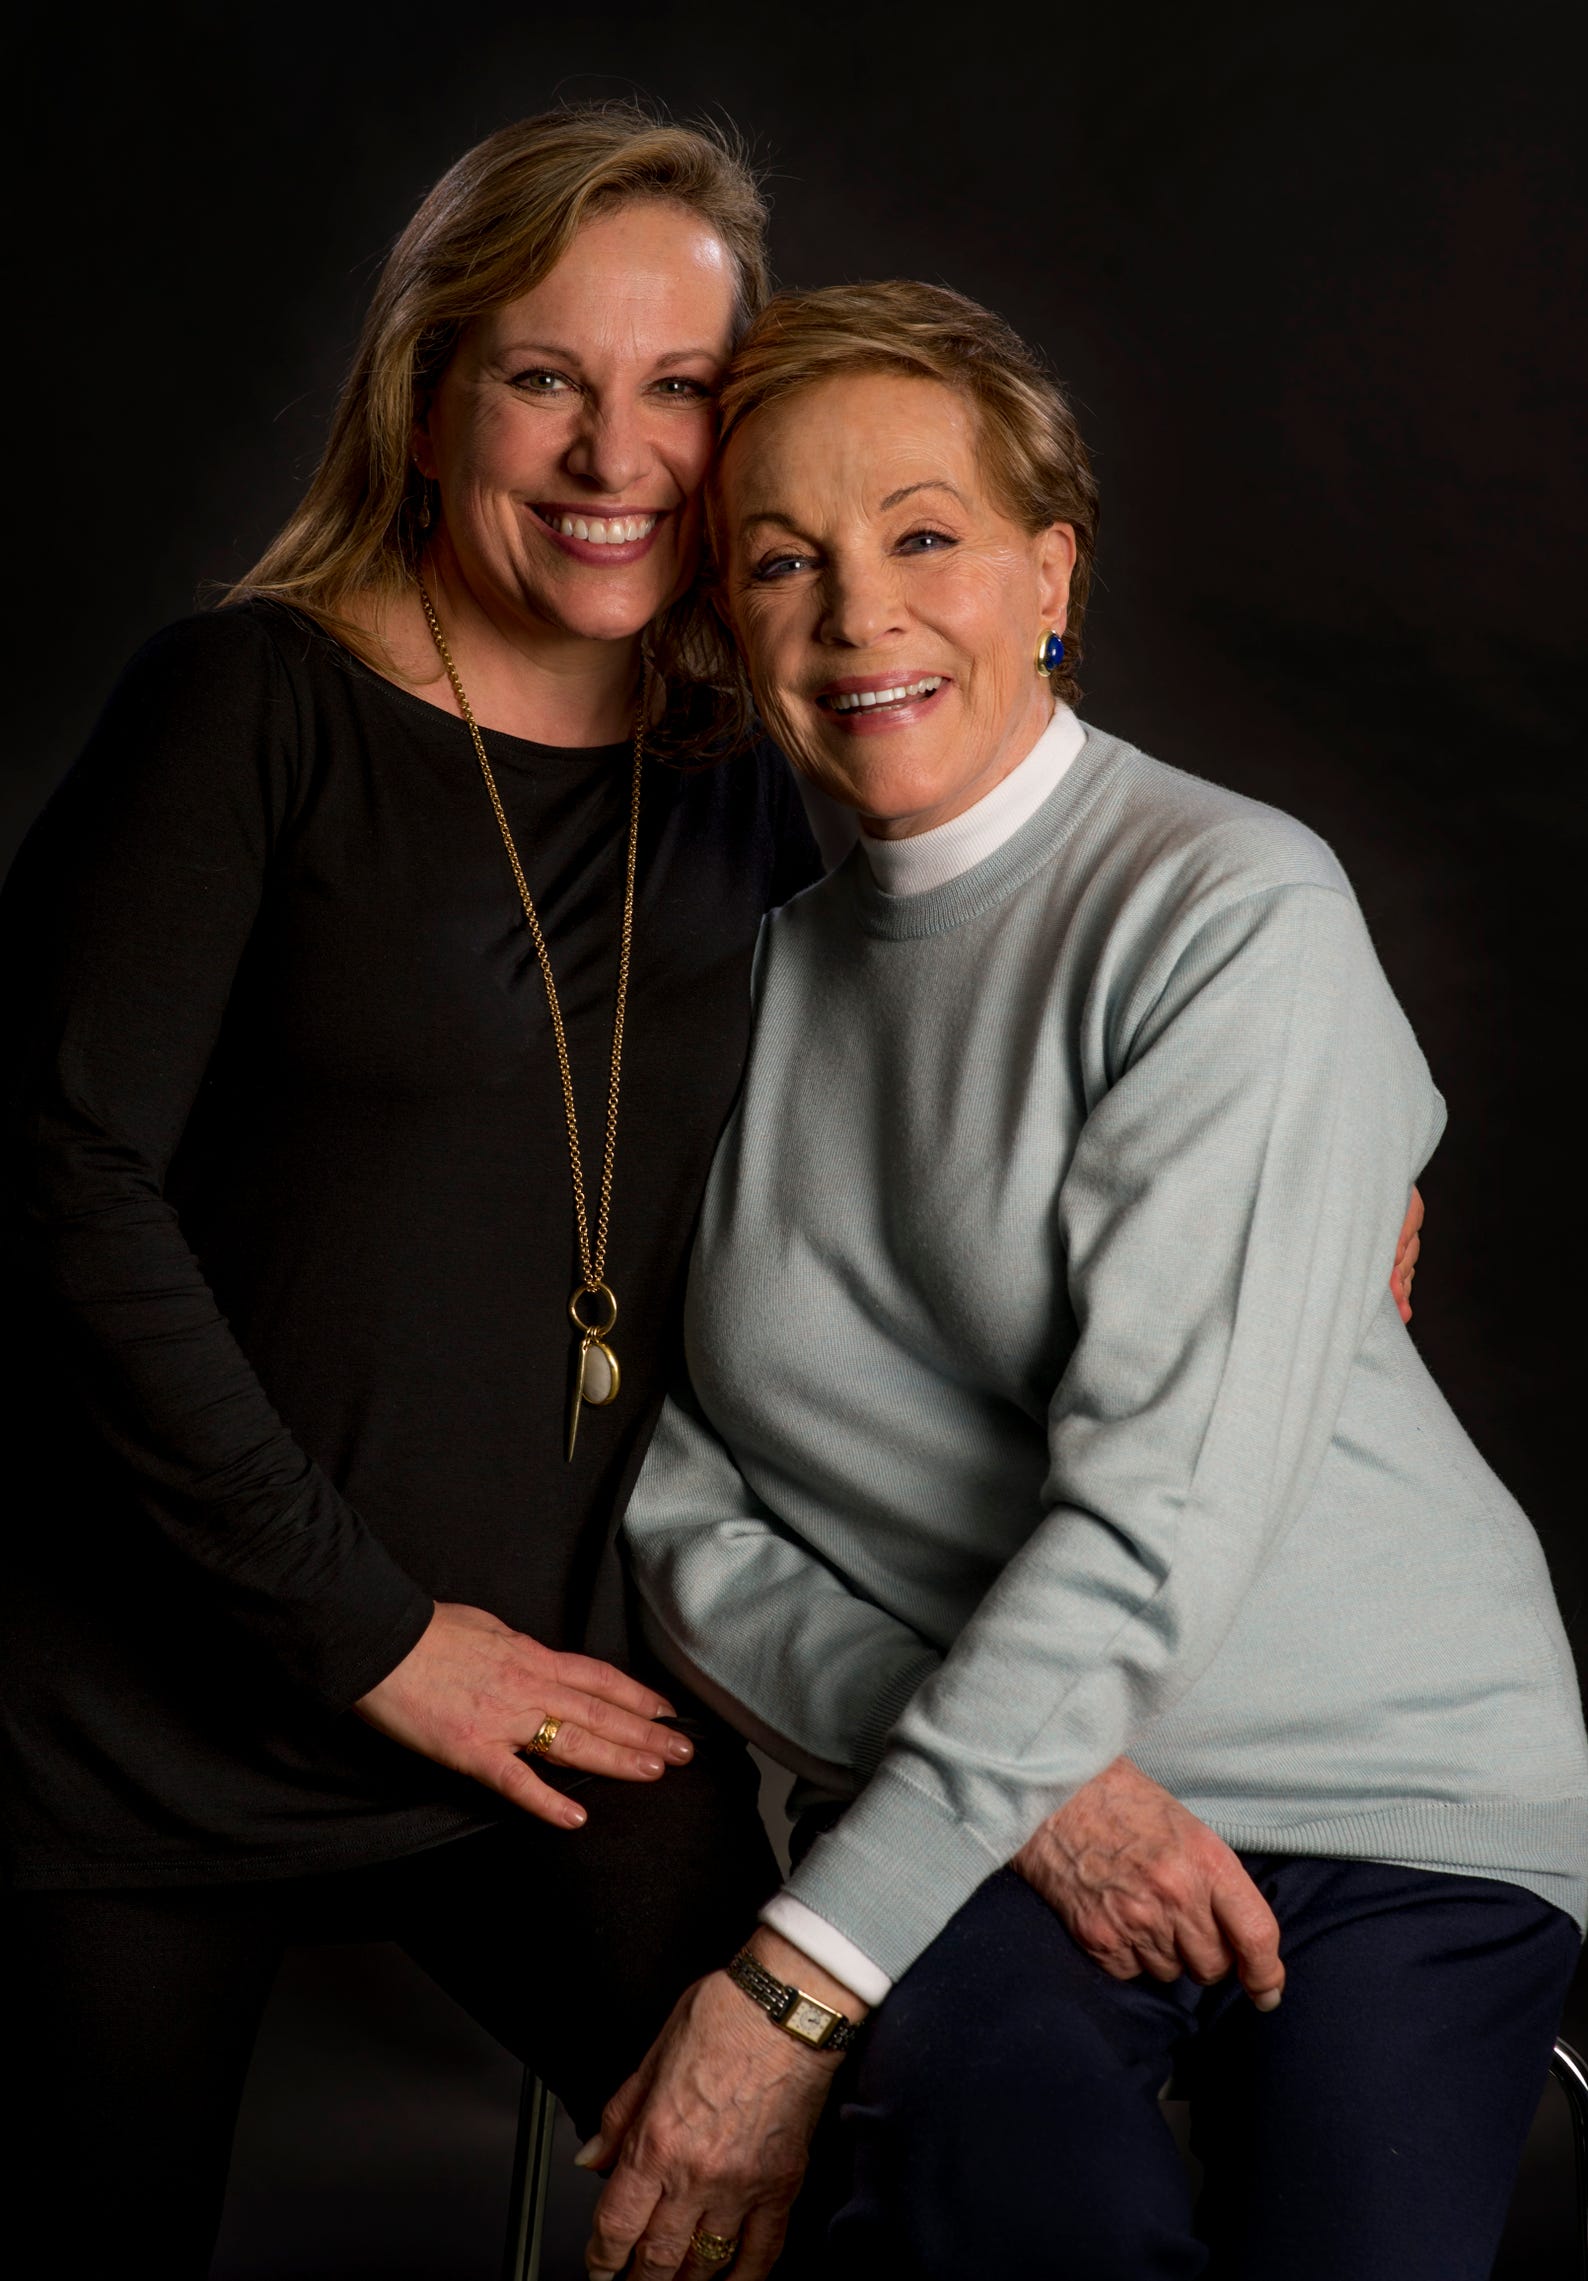 2/8/17 9:55:17 AM -- New York, NY  -- Julie Andrews (Right) and daughter, Emma Walton Hamilton (left) , to talk about their new Netflix children's show, 'Julie's Greenroom,' which teaches kids about theater with the help of special guests including Alec Baldwin, Carol Burnett and Ellie Kemper.  --    Photo by Robert Deutsch, USA TODAY staff ORG XMIT:  RD 136007 Julie Andrews 02/15/2 [Via MerlinFTP Drop]